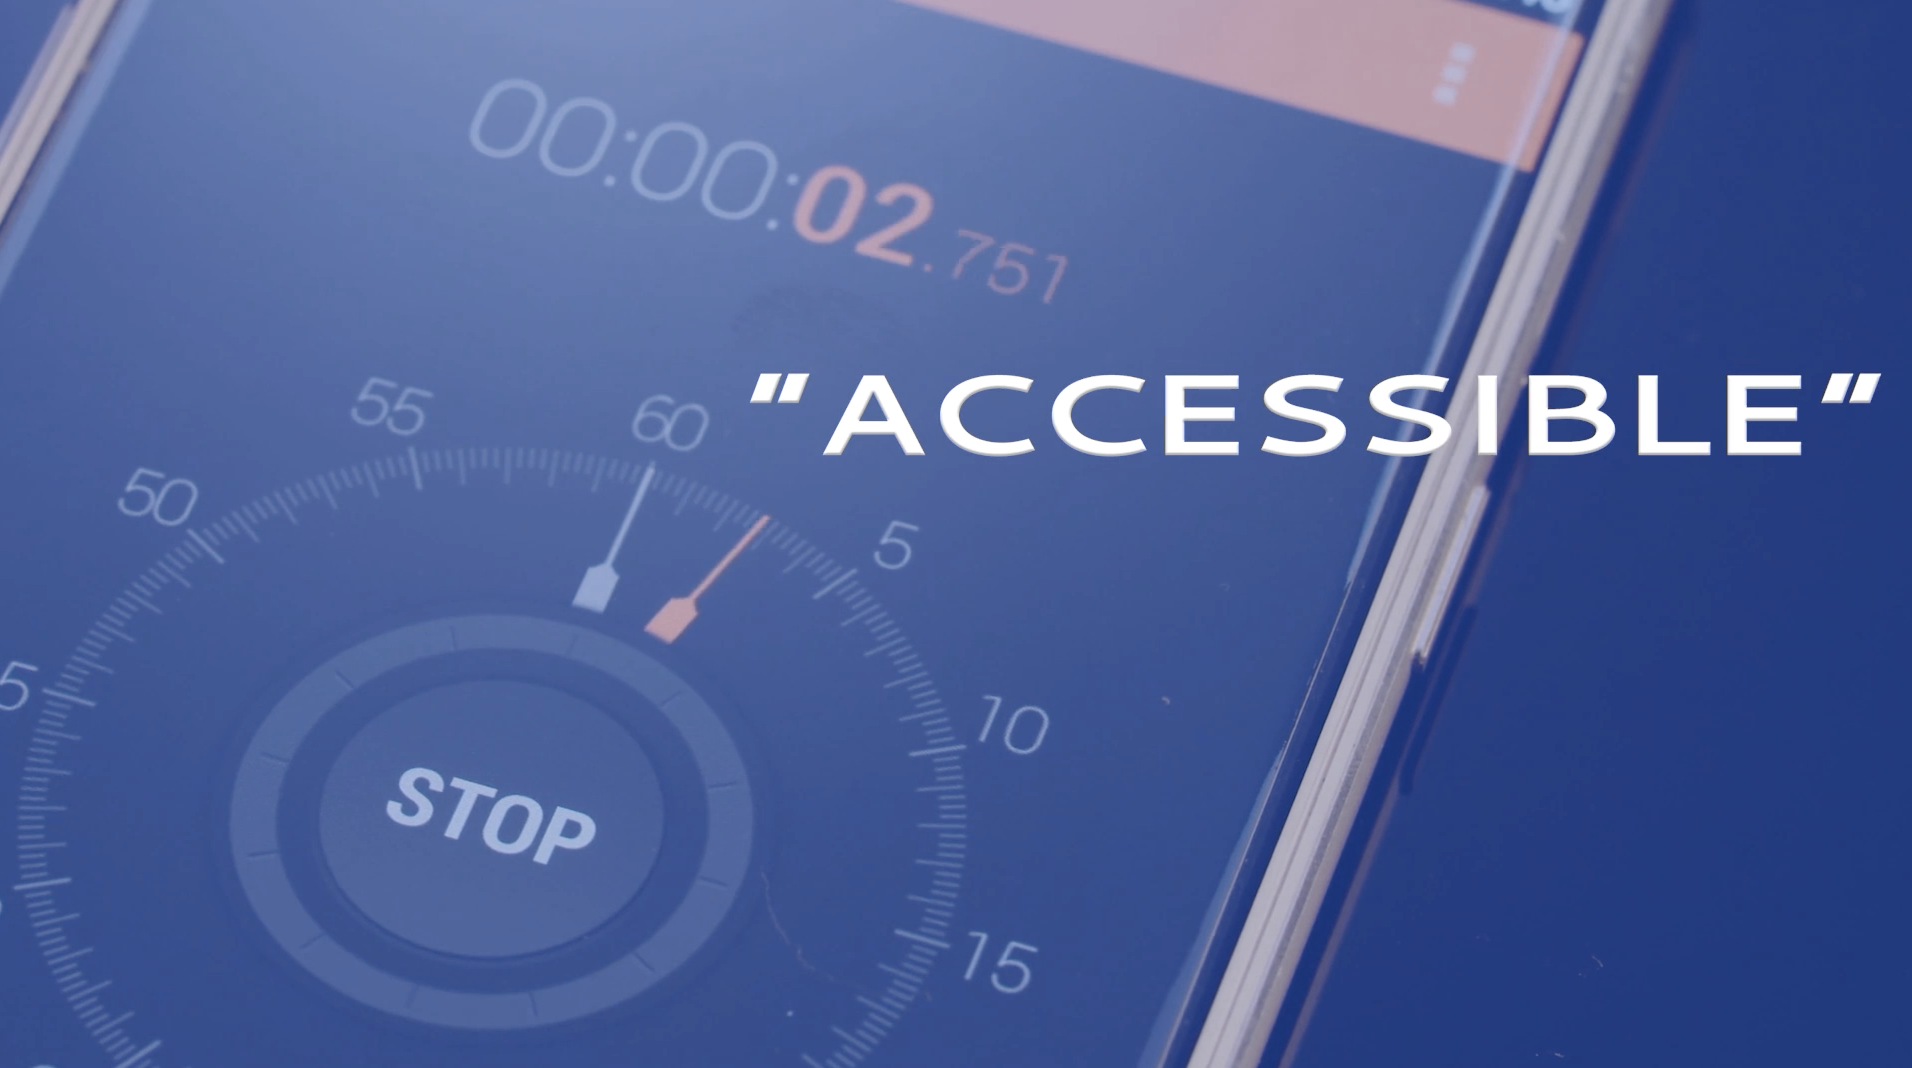 Just a Minute with Fenimore: “Accessible”